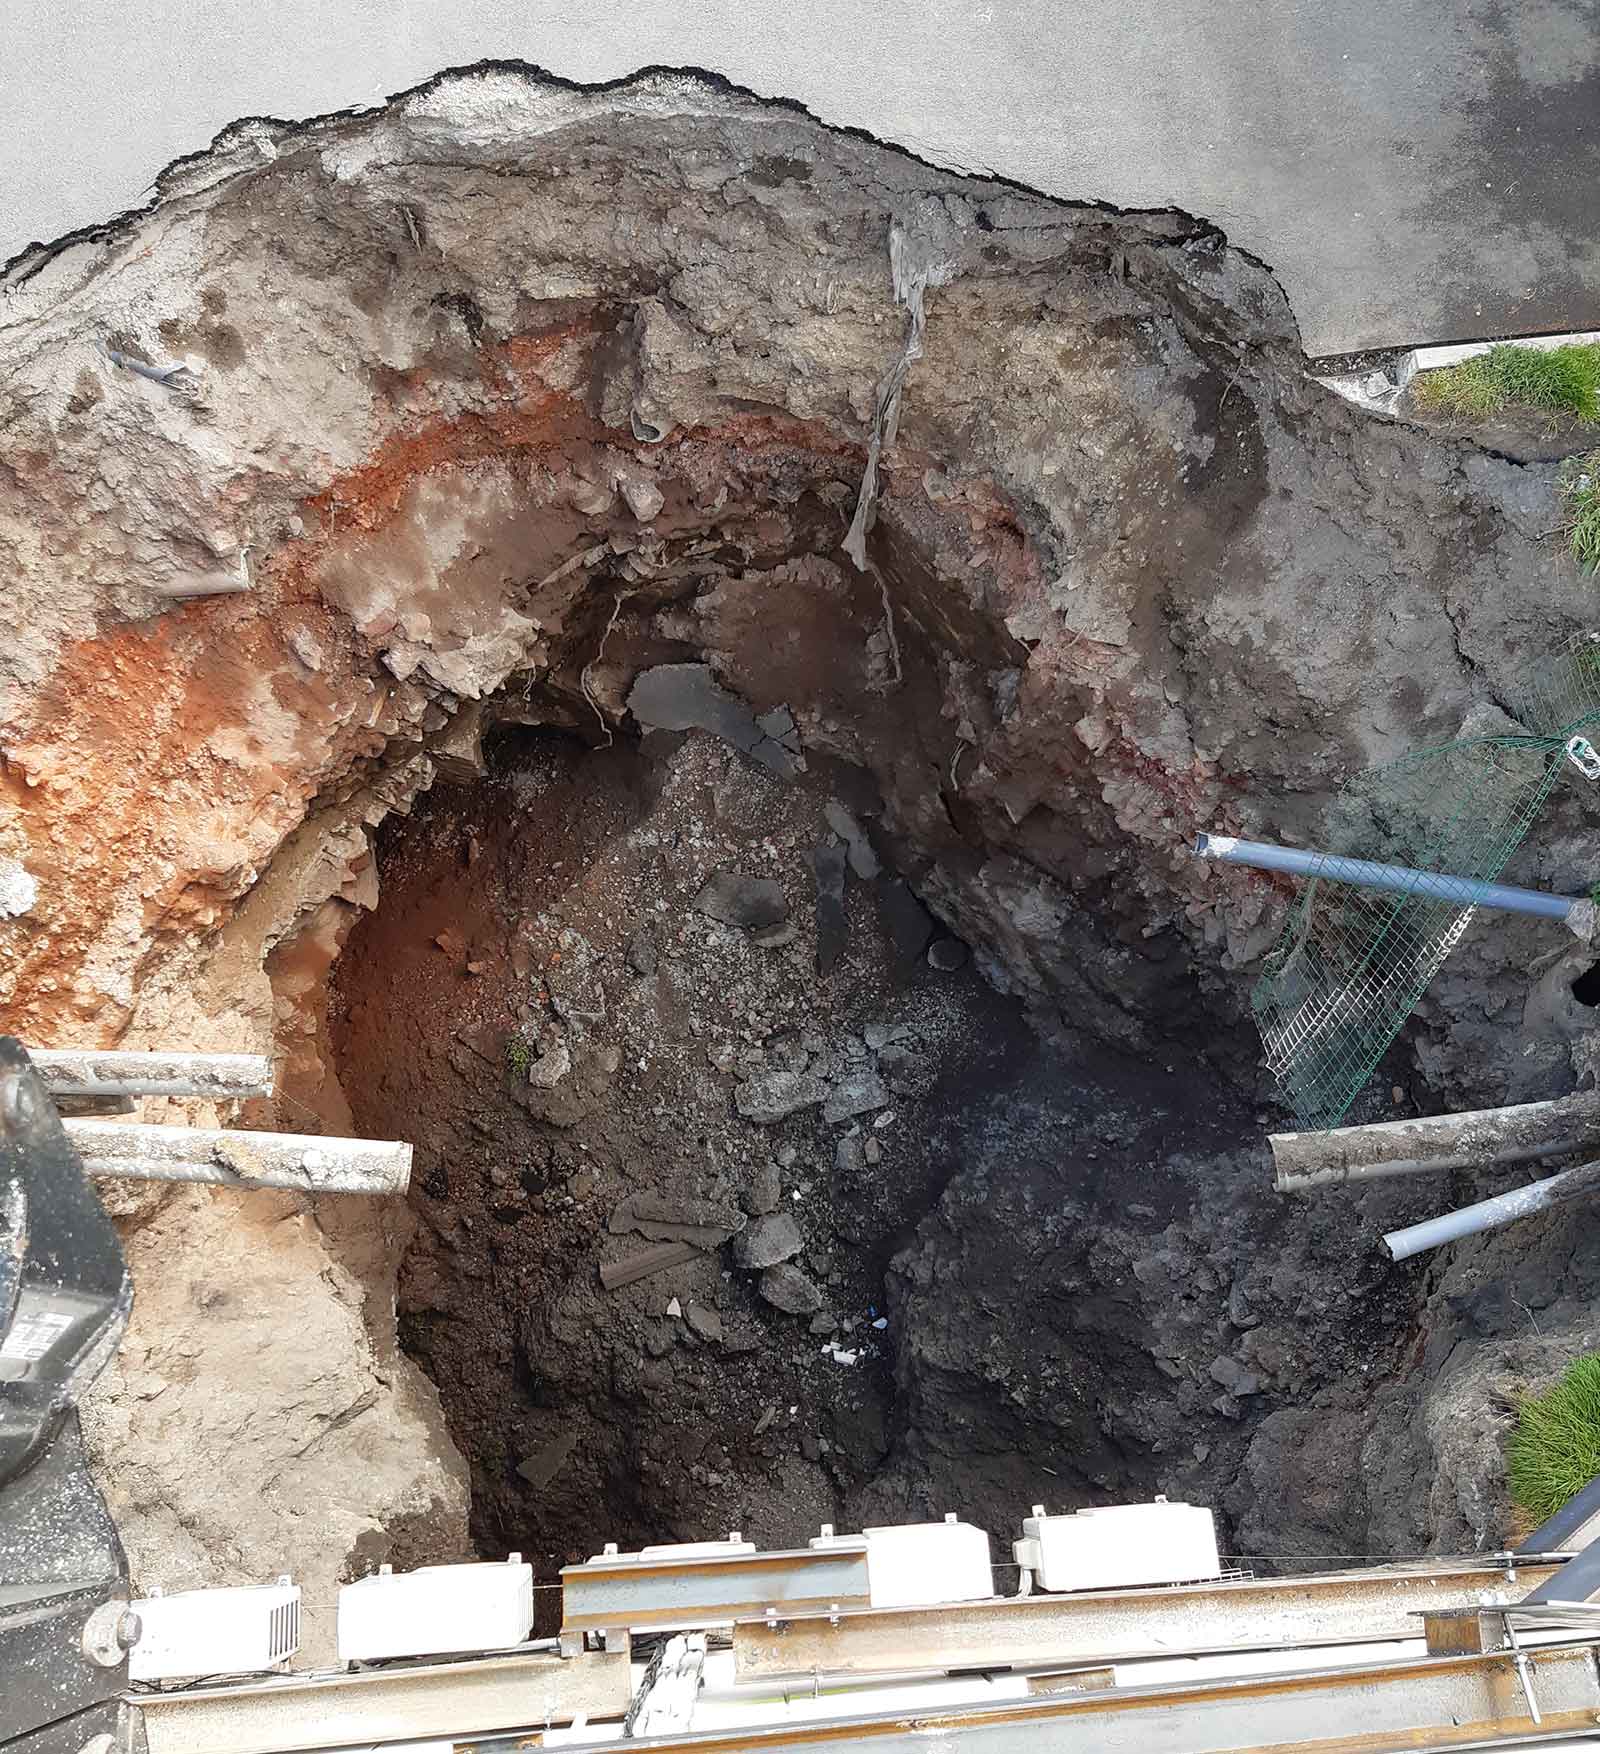 The sinkhole was 10m wide and 15m deep. It was made safe in under two months, with the first step being to shore up the facade. © BRGM – J.-L. Nédellec